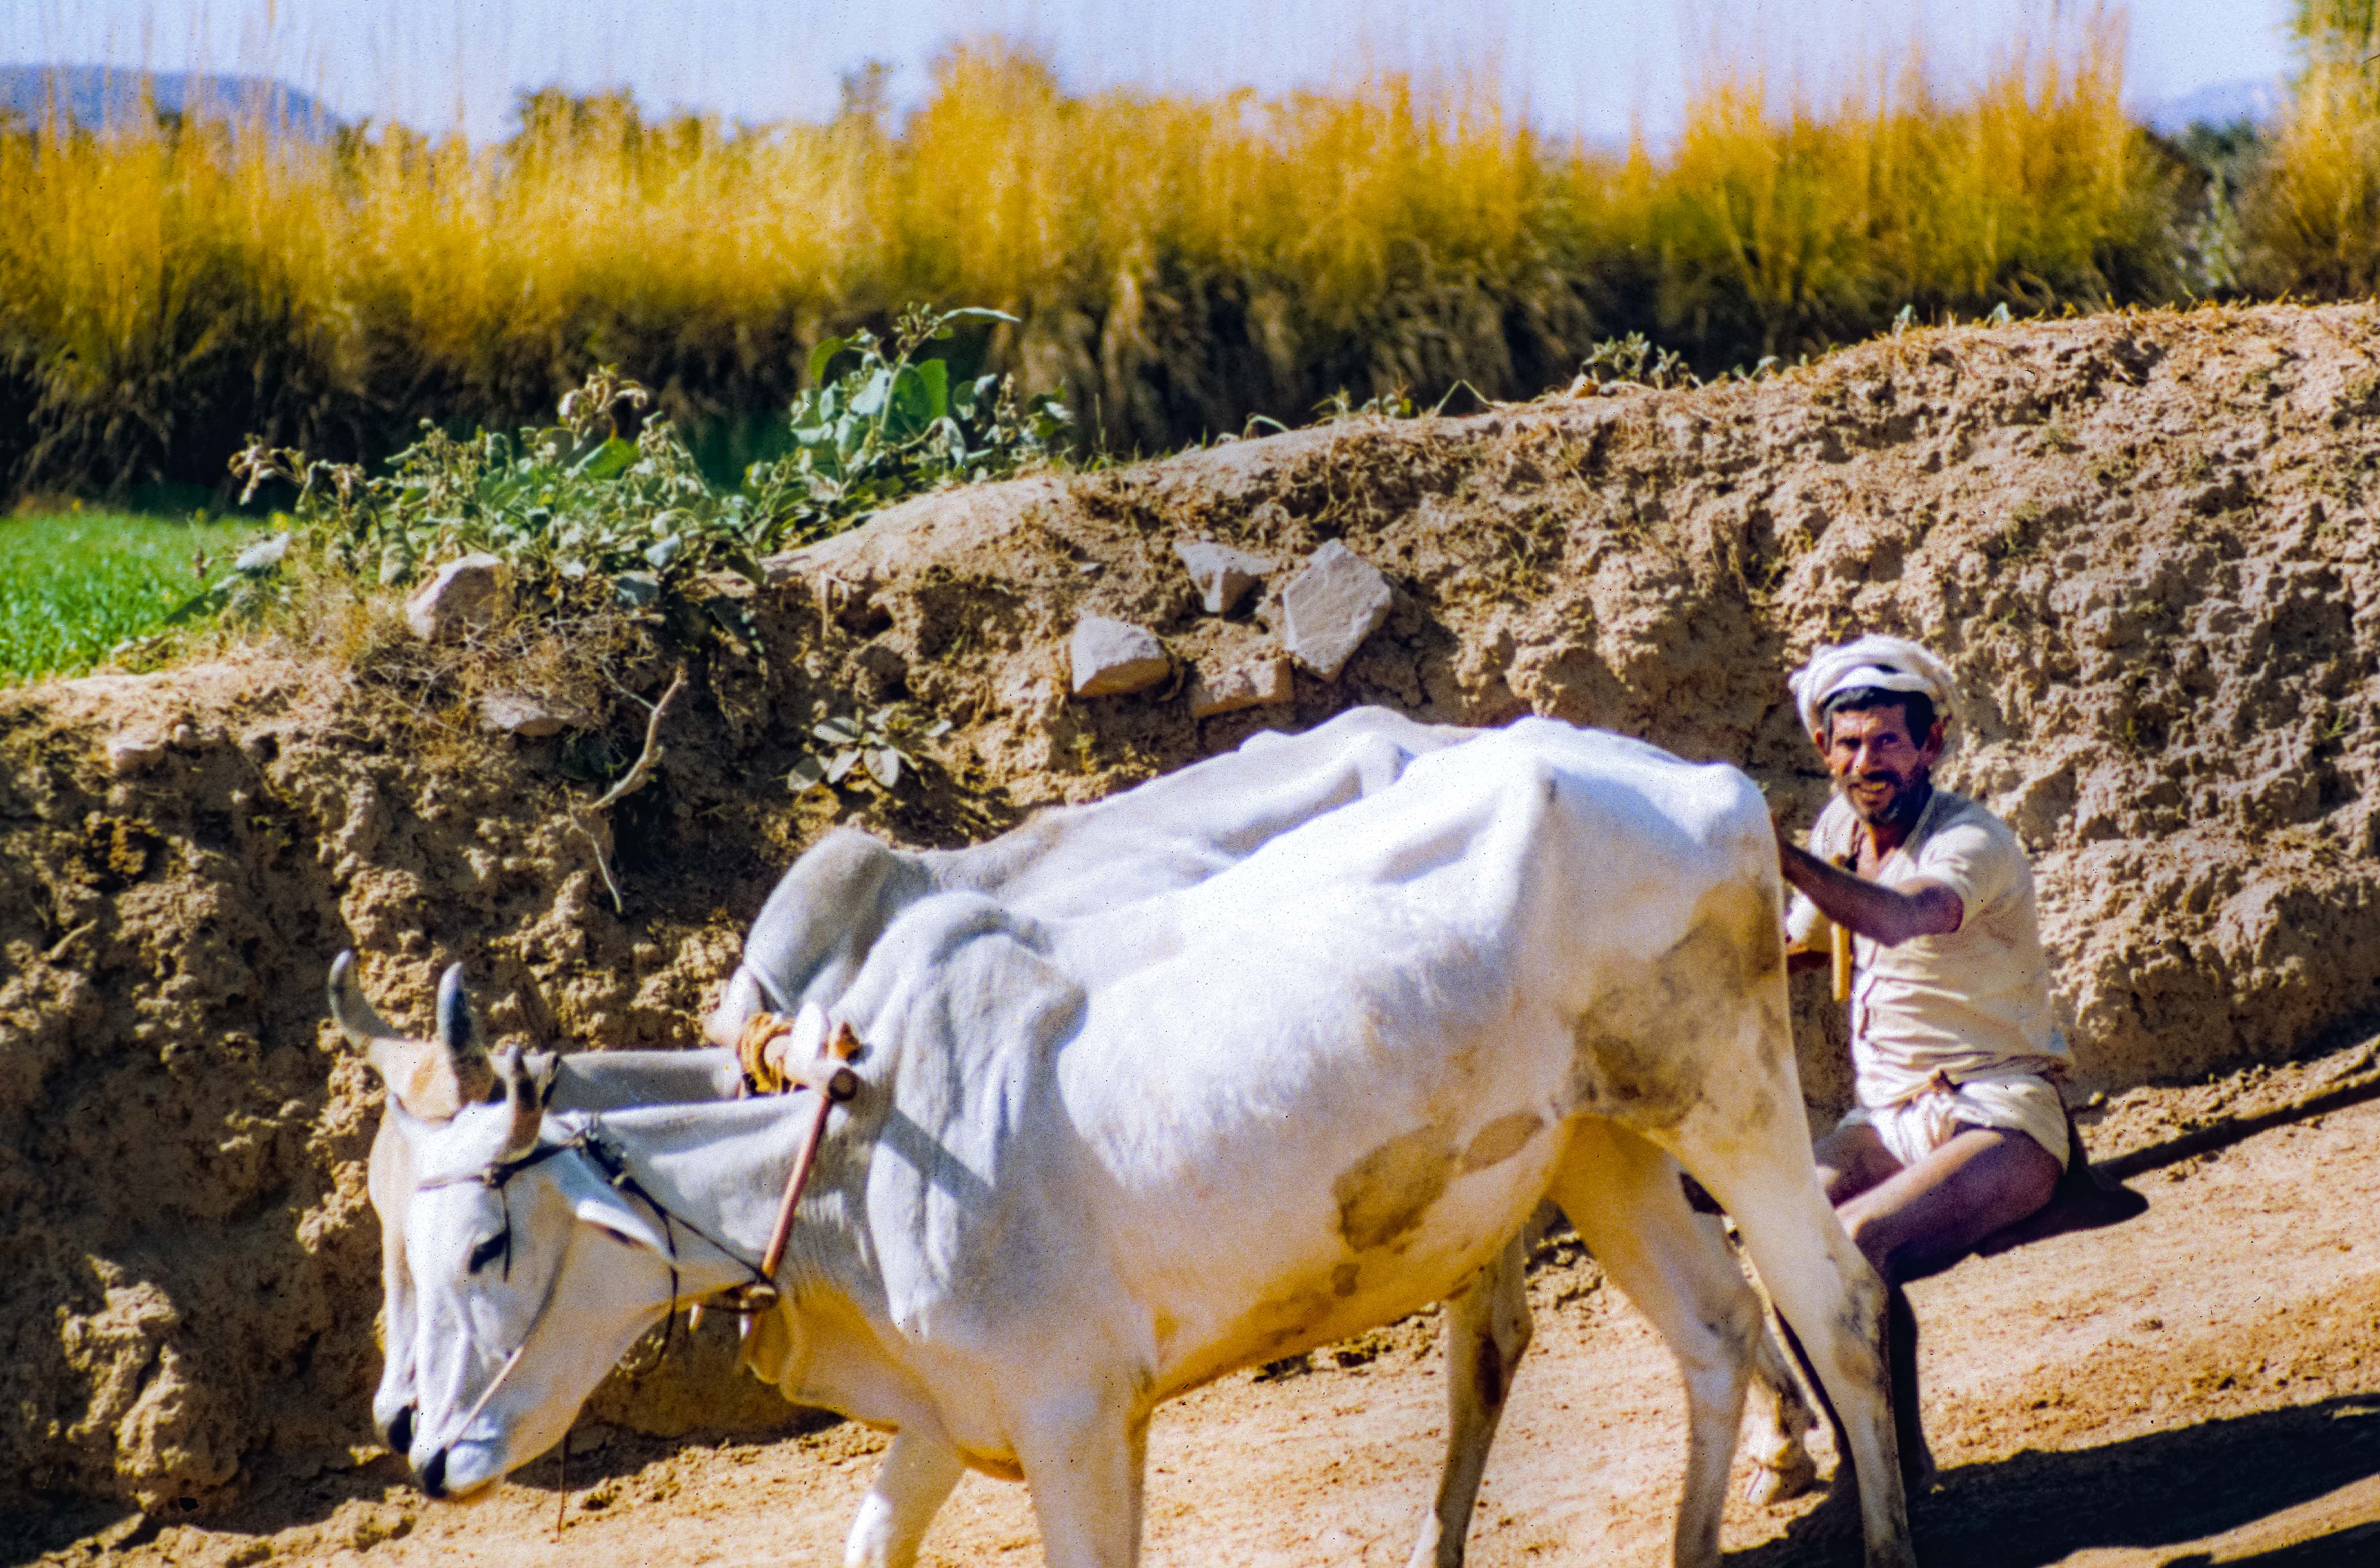 India, Rajasthan, Cows Working Water Well, 1984